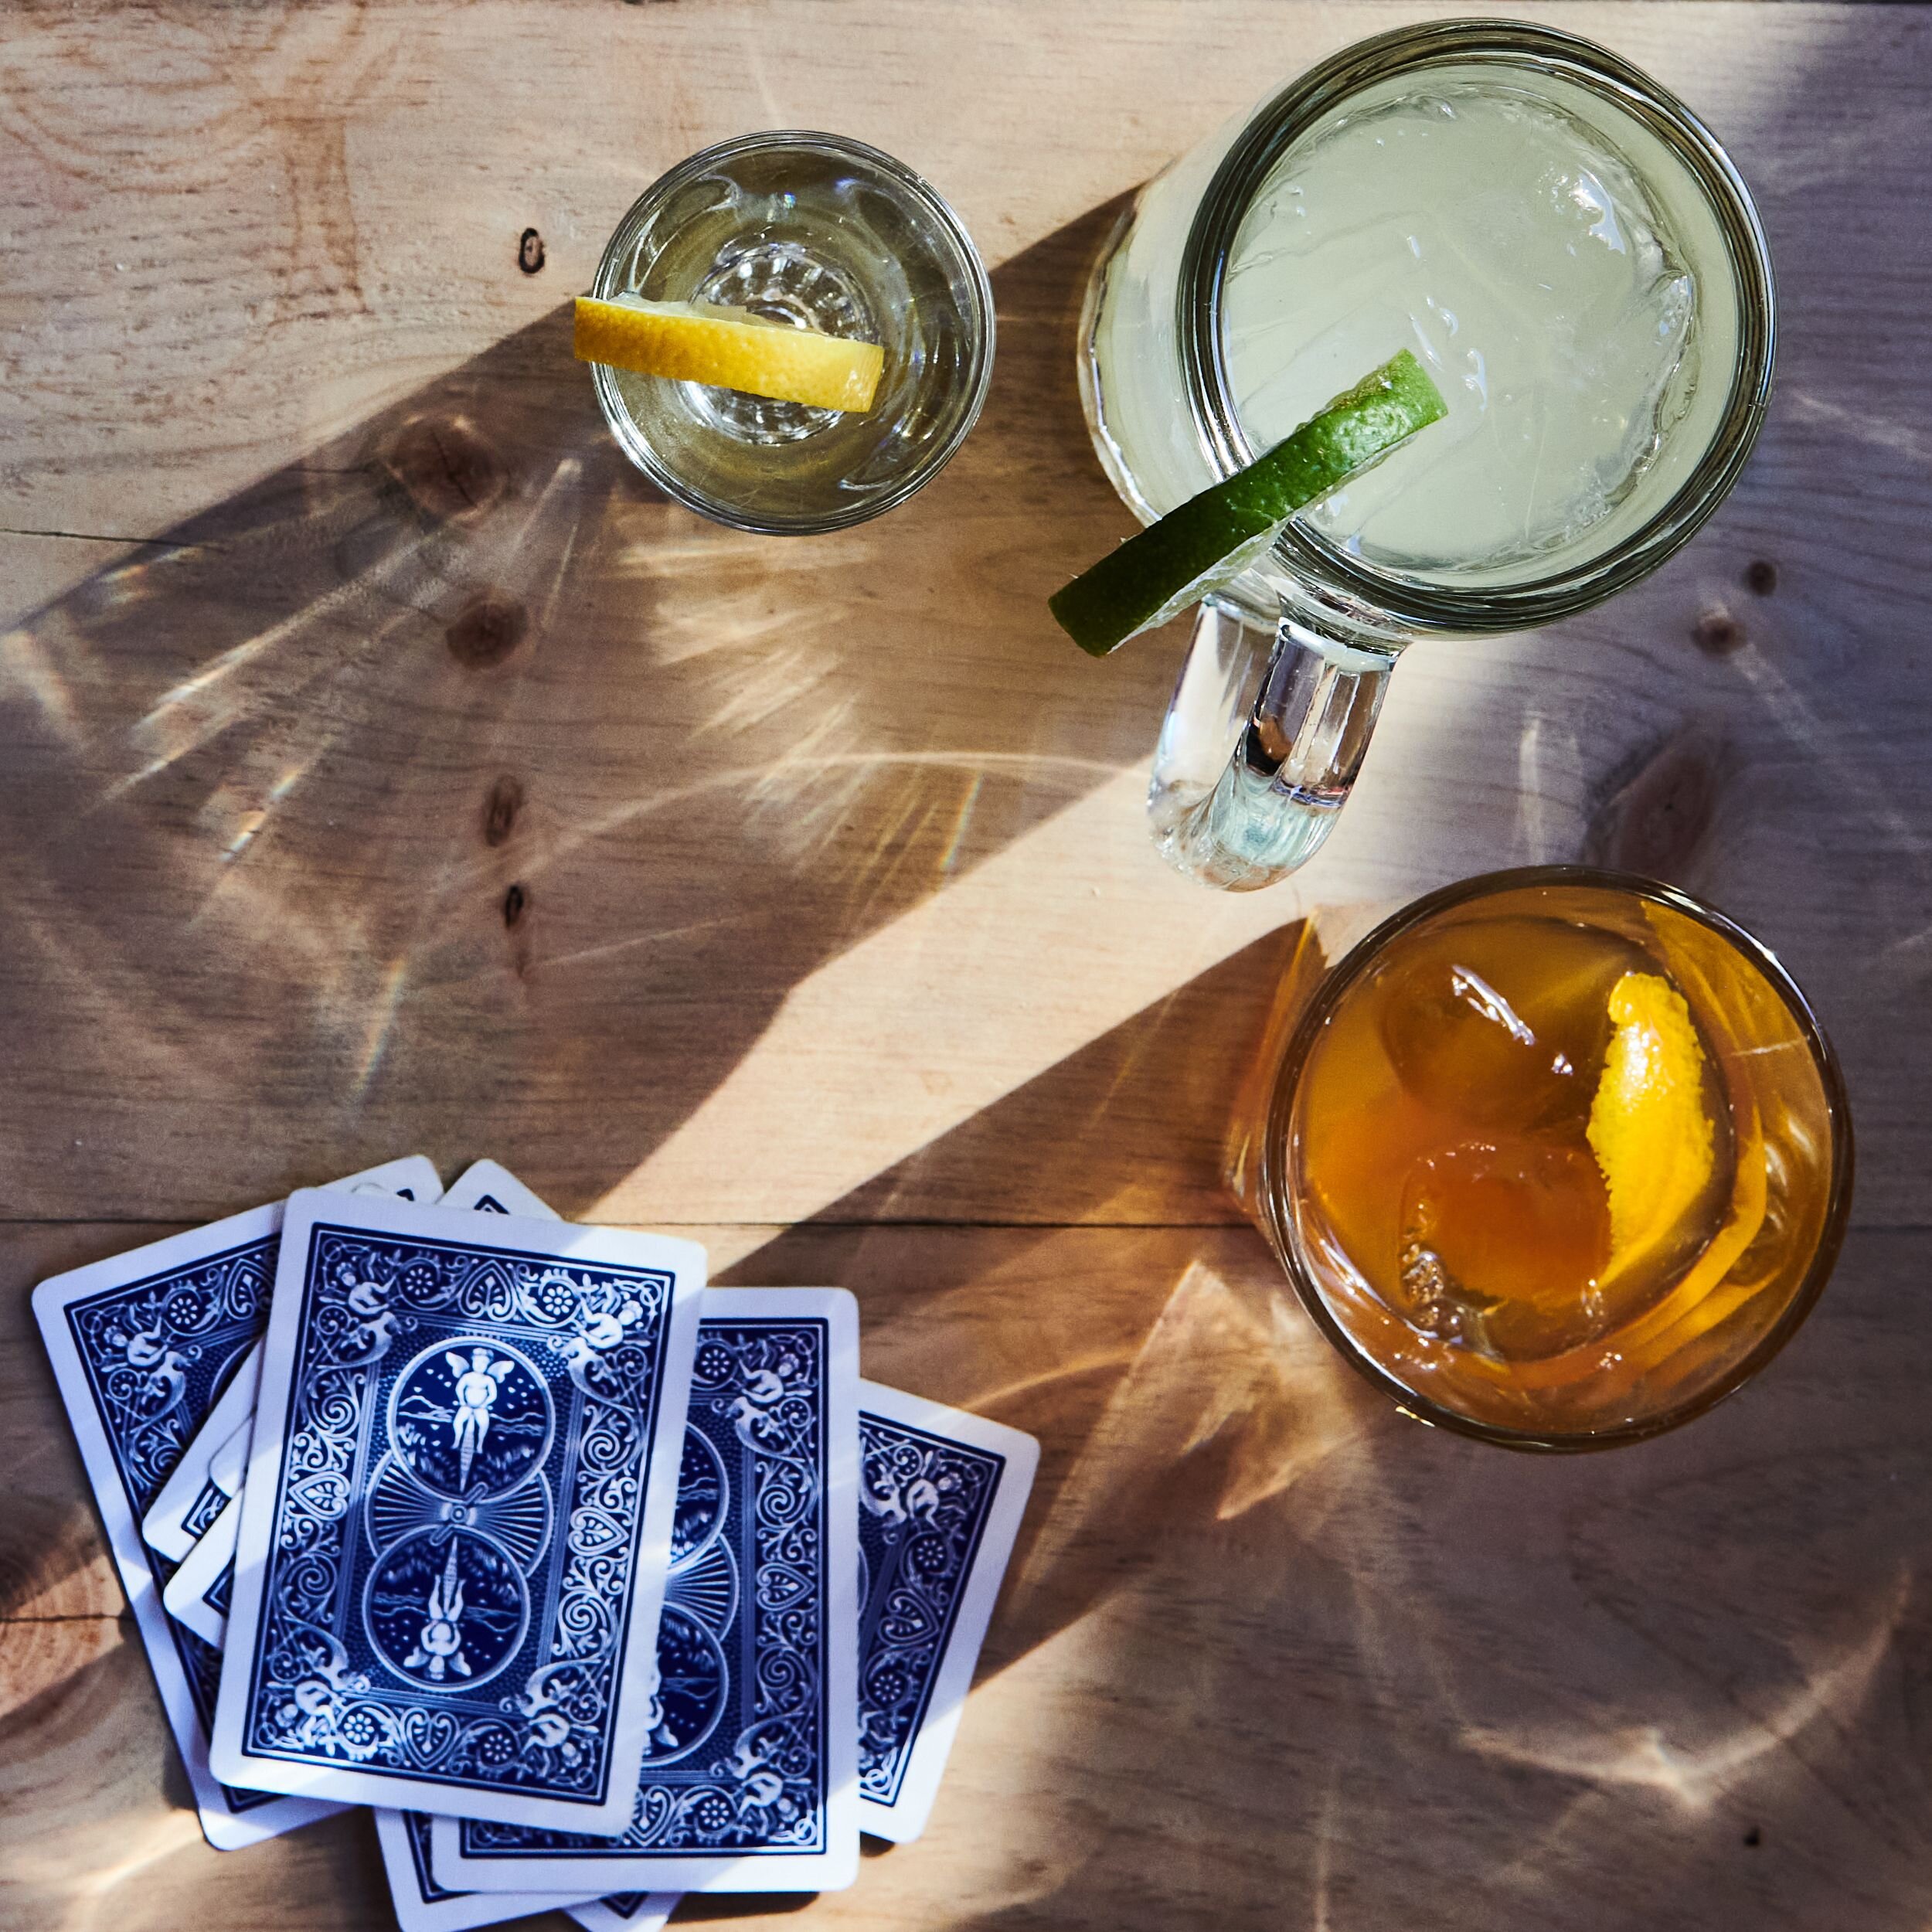 Several drinks on a table with playing cards